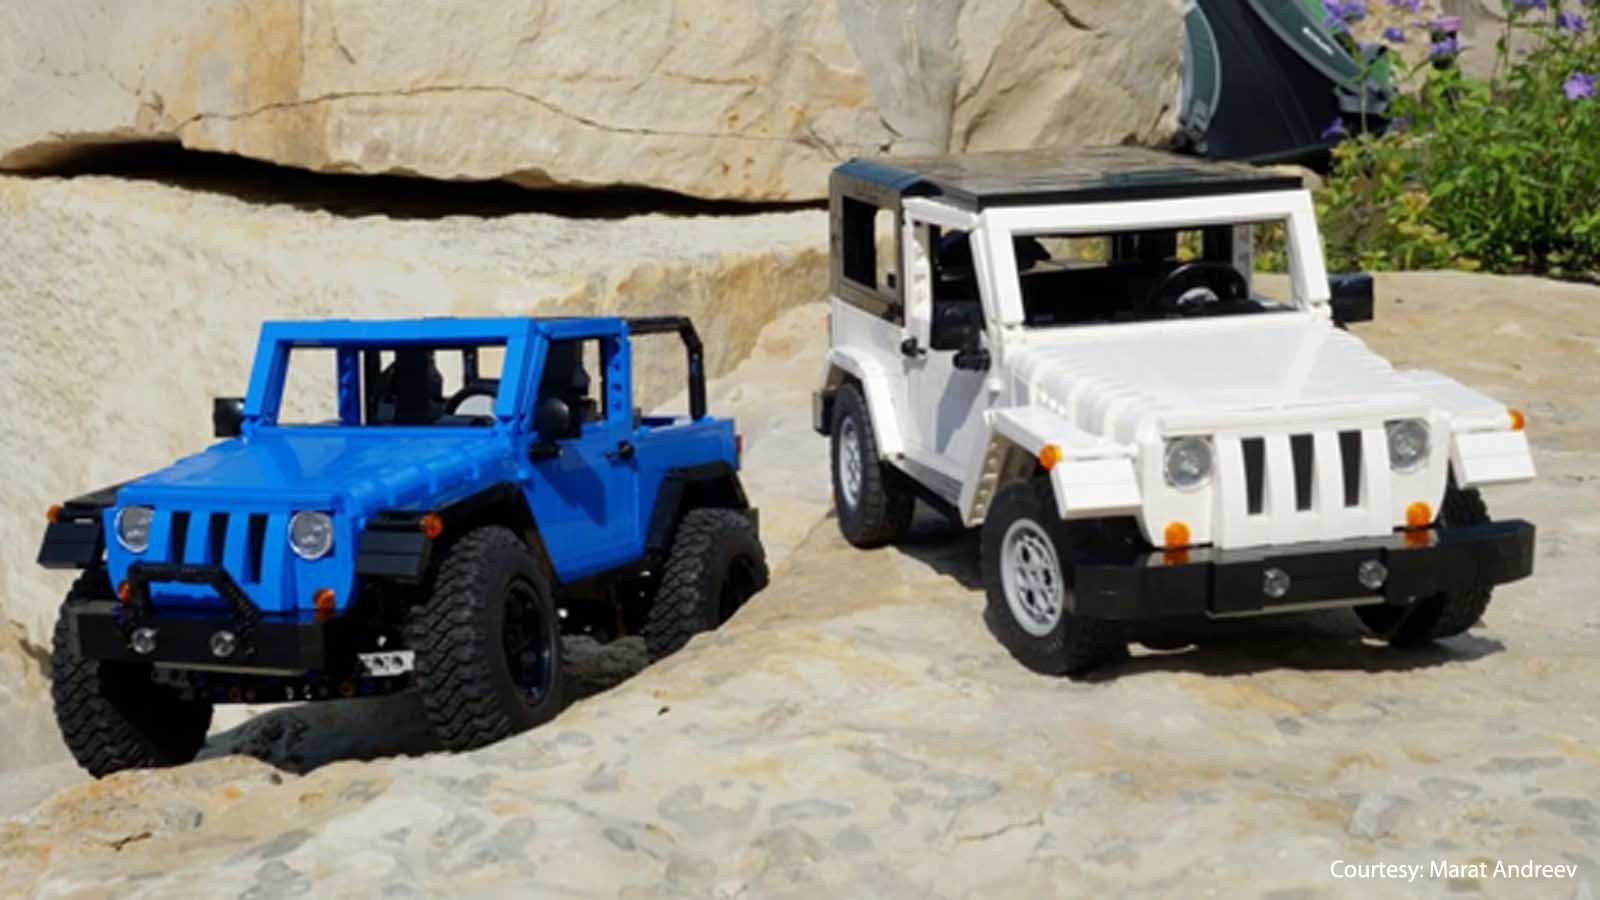 Lego Jeep Wrangler Ready to Tackle the Stay-at-Home Trail